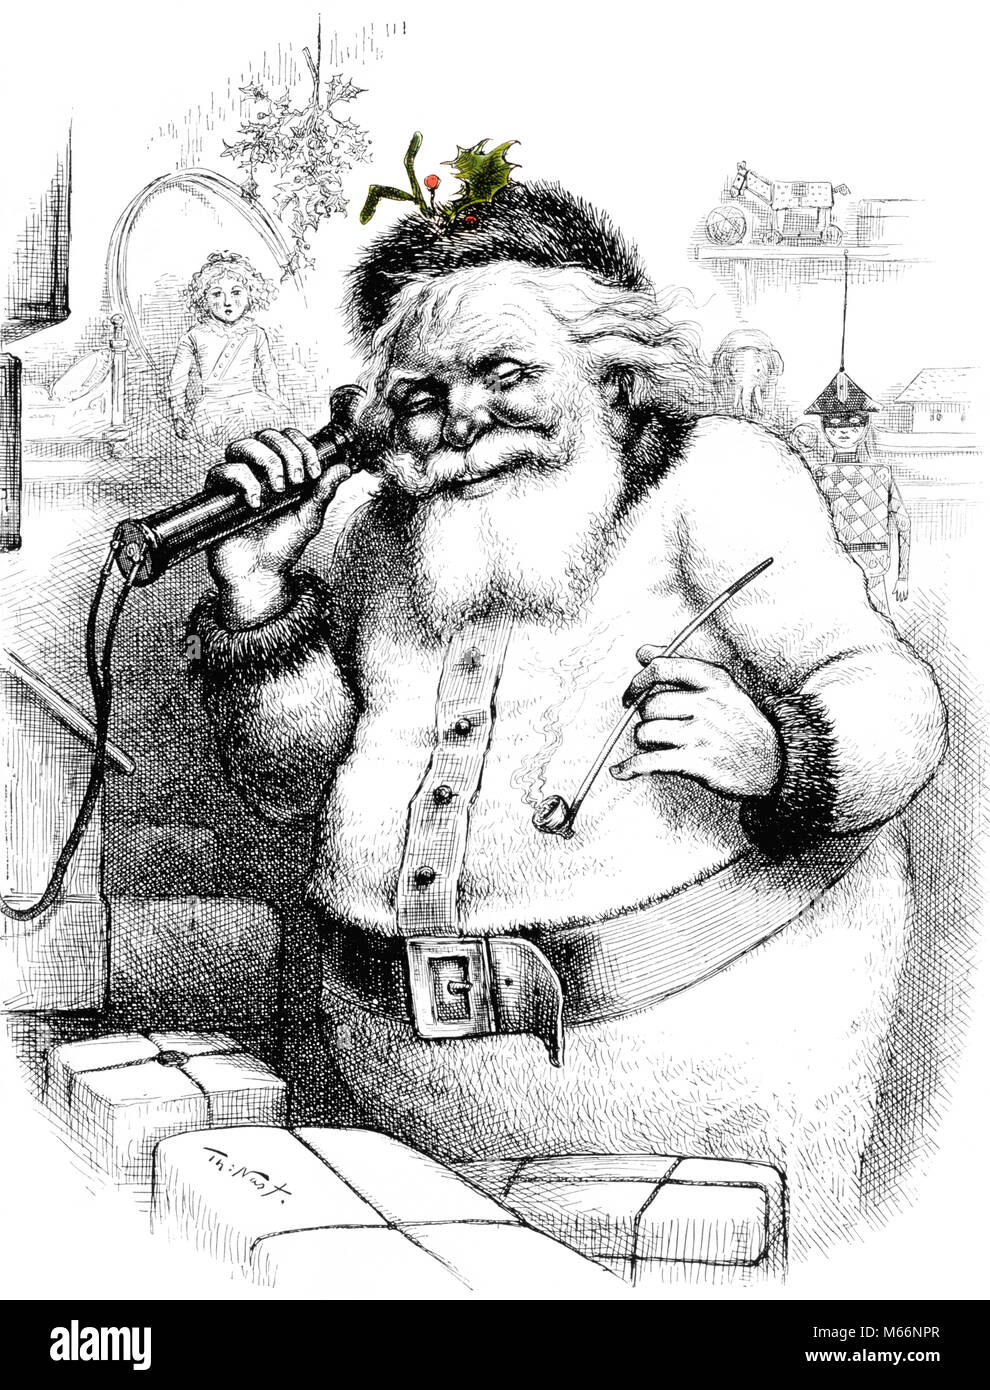 1880s THOMAS NAST LINE DRAWING OF SANTA CLAUS ON TELEPHONE WITH PIPE IN HAND AND GREEN HOLLY AND BERRIES IN HIS HAT - kx13205 NAW001 HARS SENIOR MAN SAINT SENIOR ADULT NOSTALGIA CANDLESTICK HISTORIC HAPPINESS HIS AND SANTA CLAUS HOLLY FACIAL HAIR PHONES DECEMBER DECEMBER 25 1880s KRIS KRINGLE ST. NICK BERRIES FATHER CHRISTMAS JOLLY MALES NICHOLAS NAST OLD FASHIONED PERSONS THOMAS NAST WALL PHONE Stock Photo